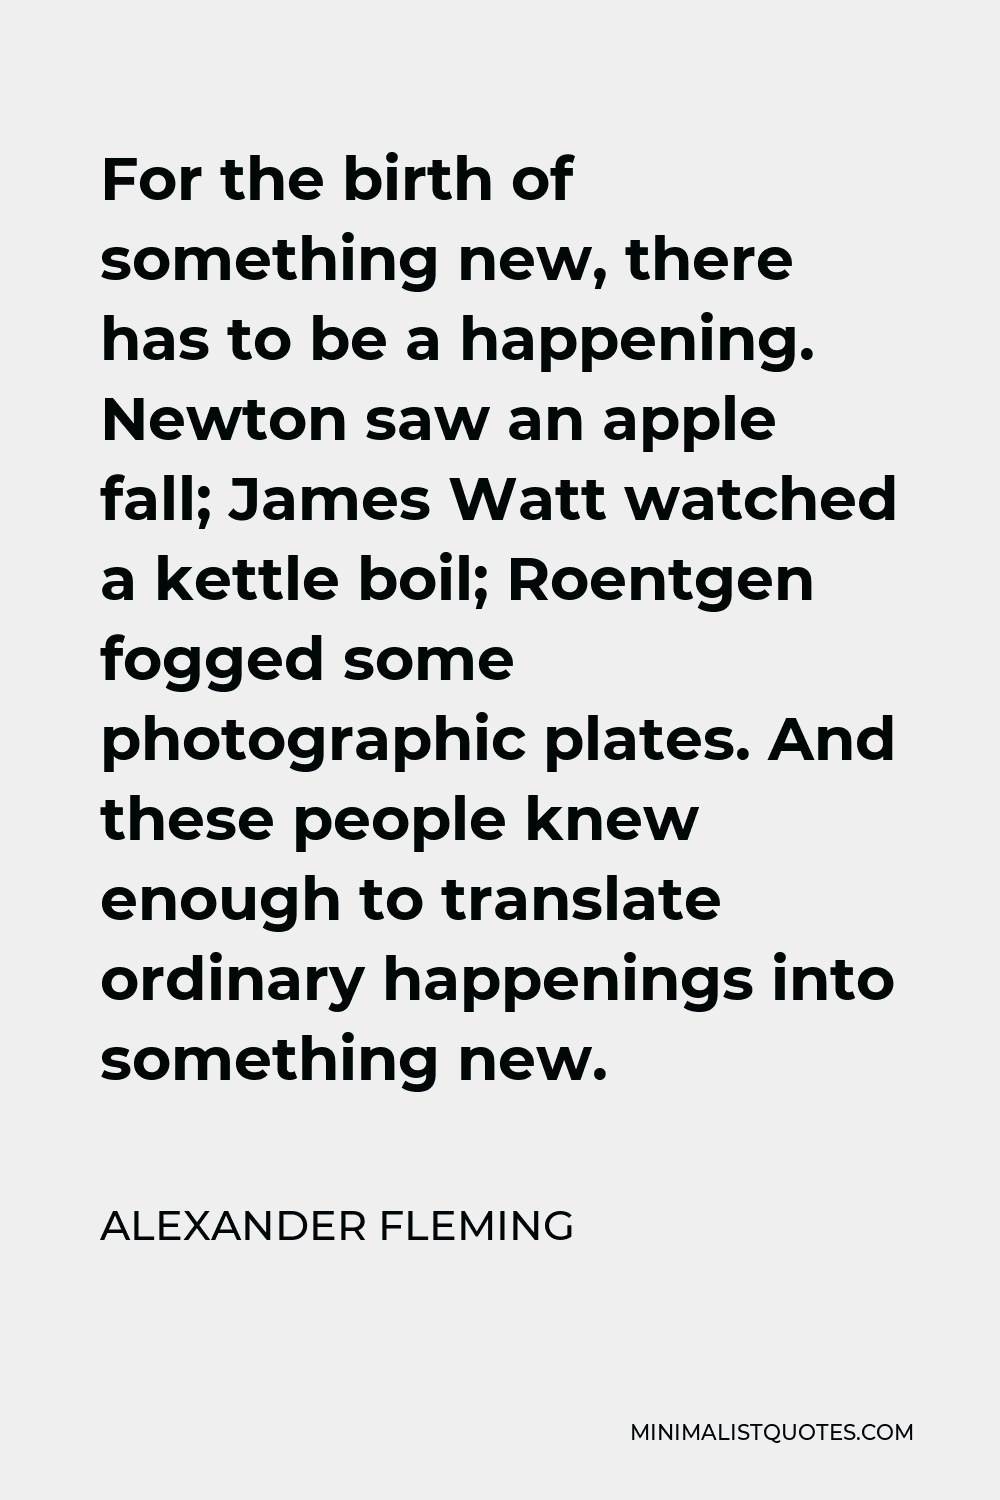 Alexander Fleming Quote - For the birth of something new, there has to be a happening. Newton saw an apple fall; James Watt watched a kettle boil; Roentgen fogged some photographic plates. And these people knew enough to translate ordinary happenings into something new.